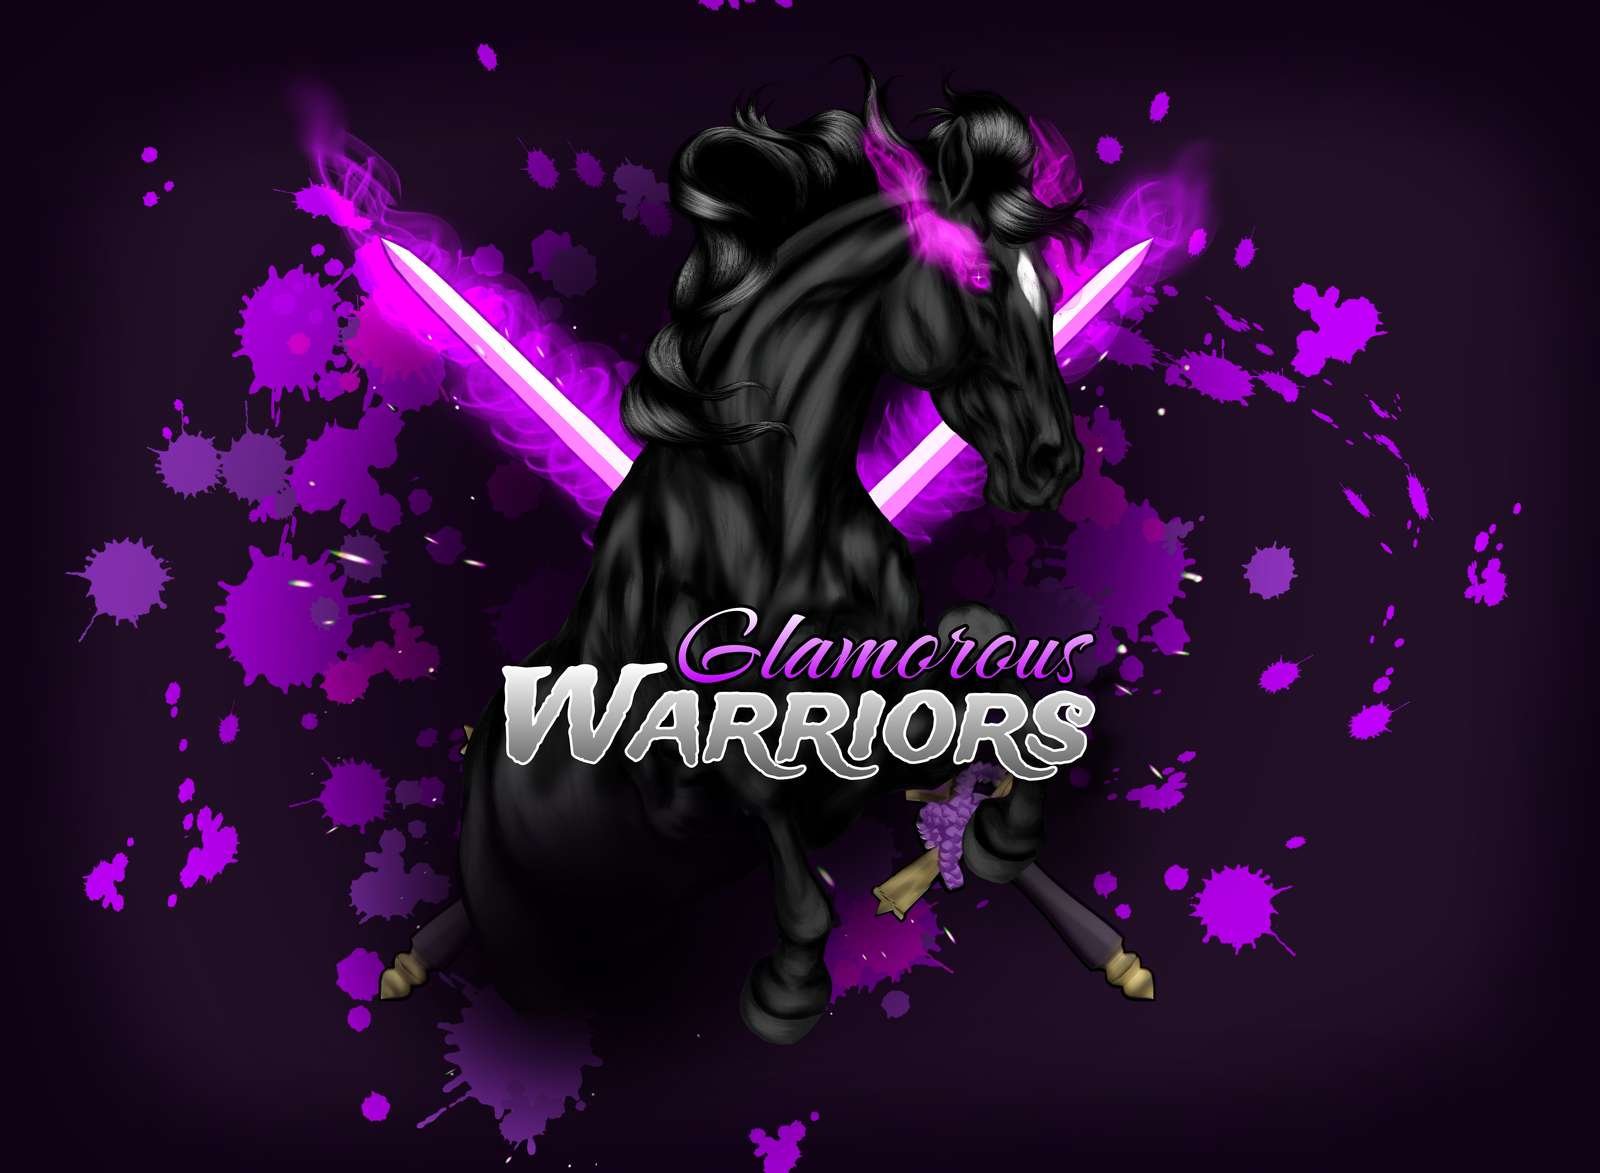 Warrior logo puzzle online from photo